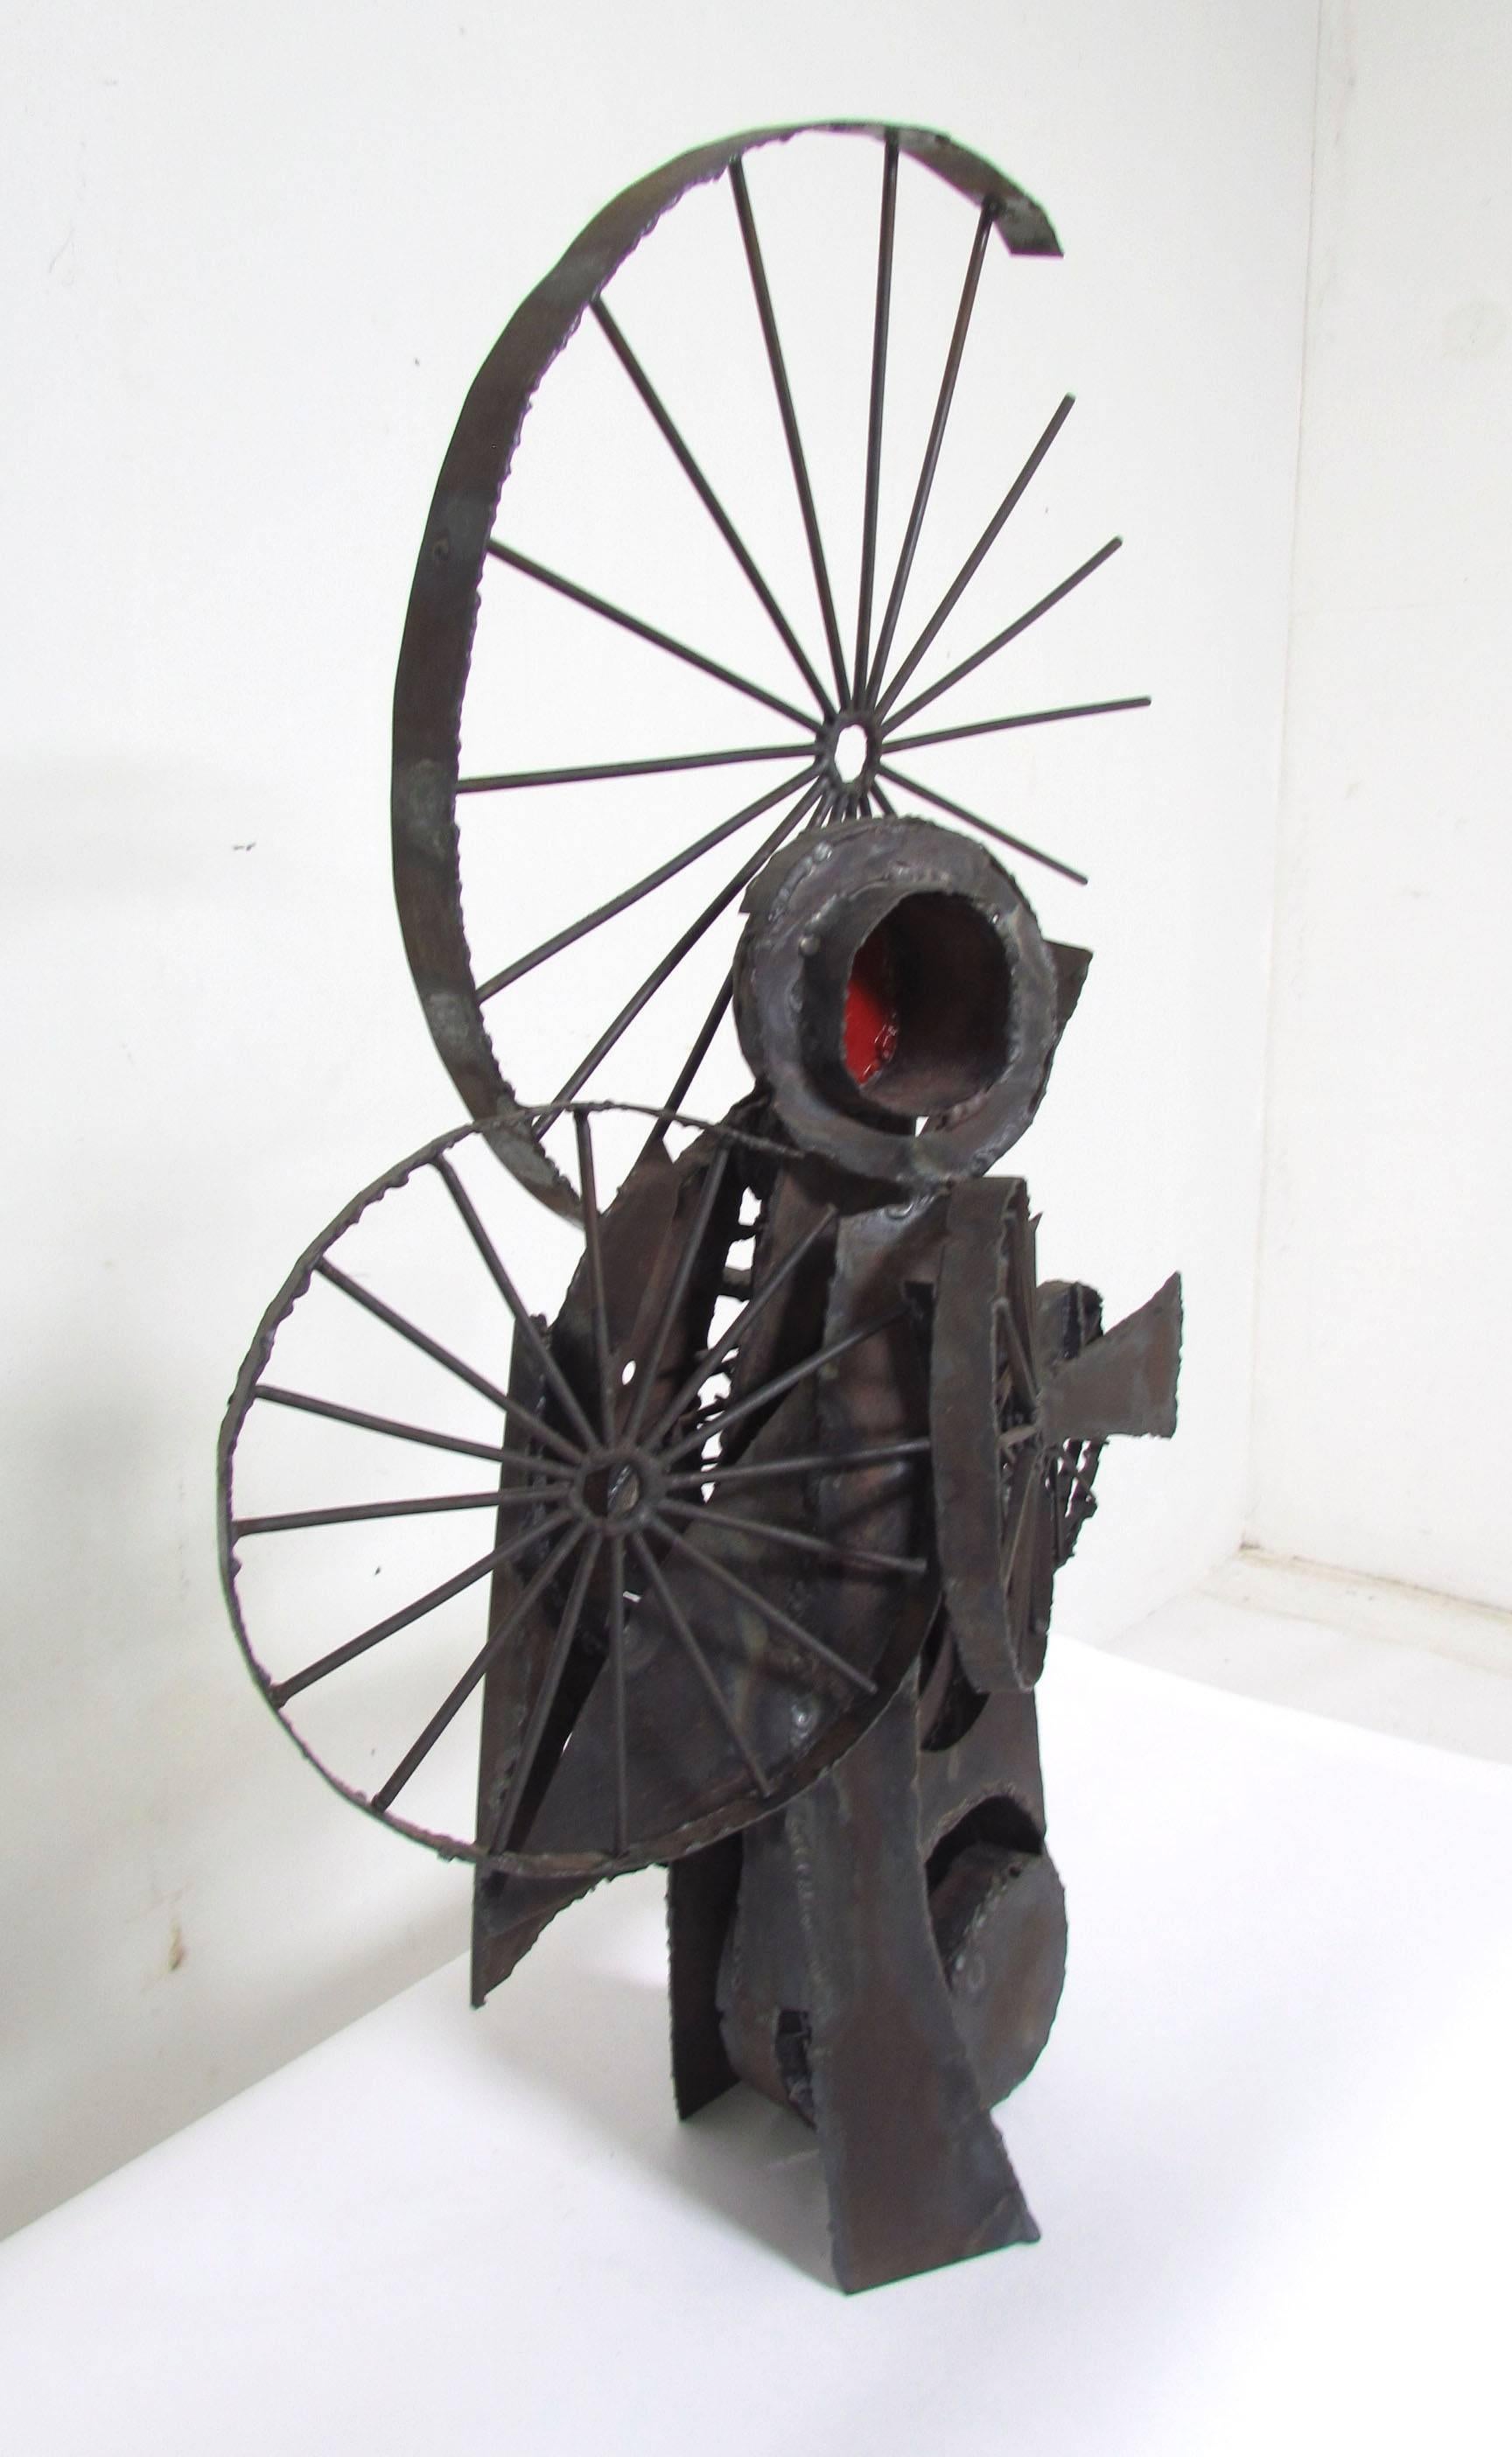 Large tabletop abstract Brutalist steel sculpture, circa 1960s, with spoked elements reminiscent of the machine sculptures of Jean Tinguely or Arthur Ganson.